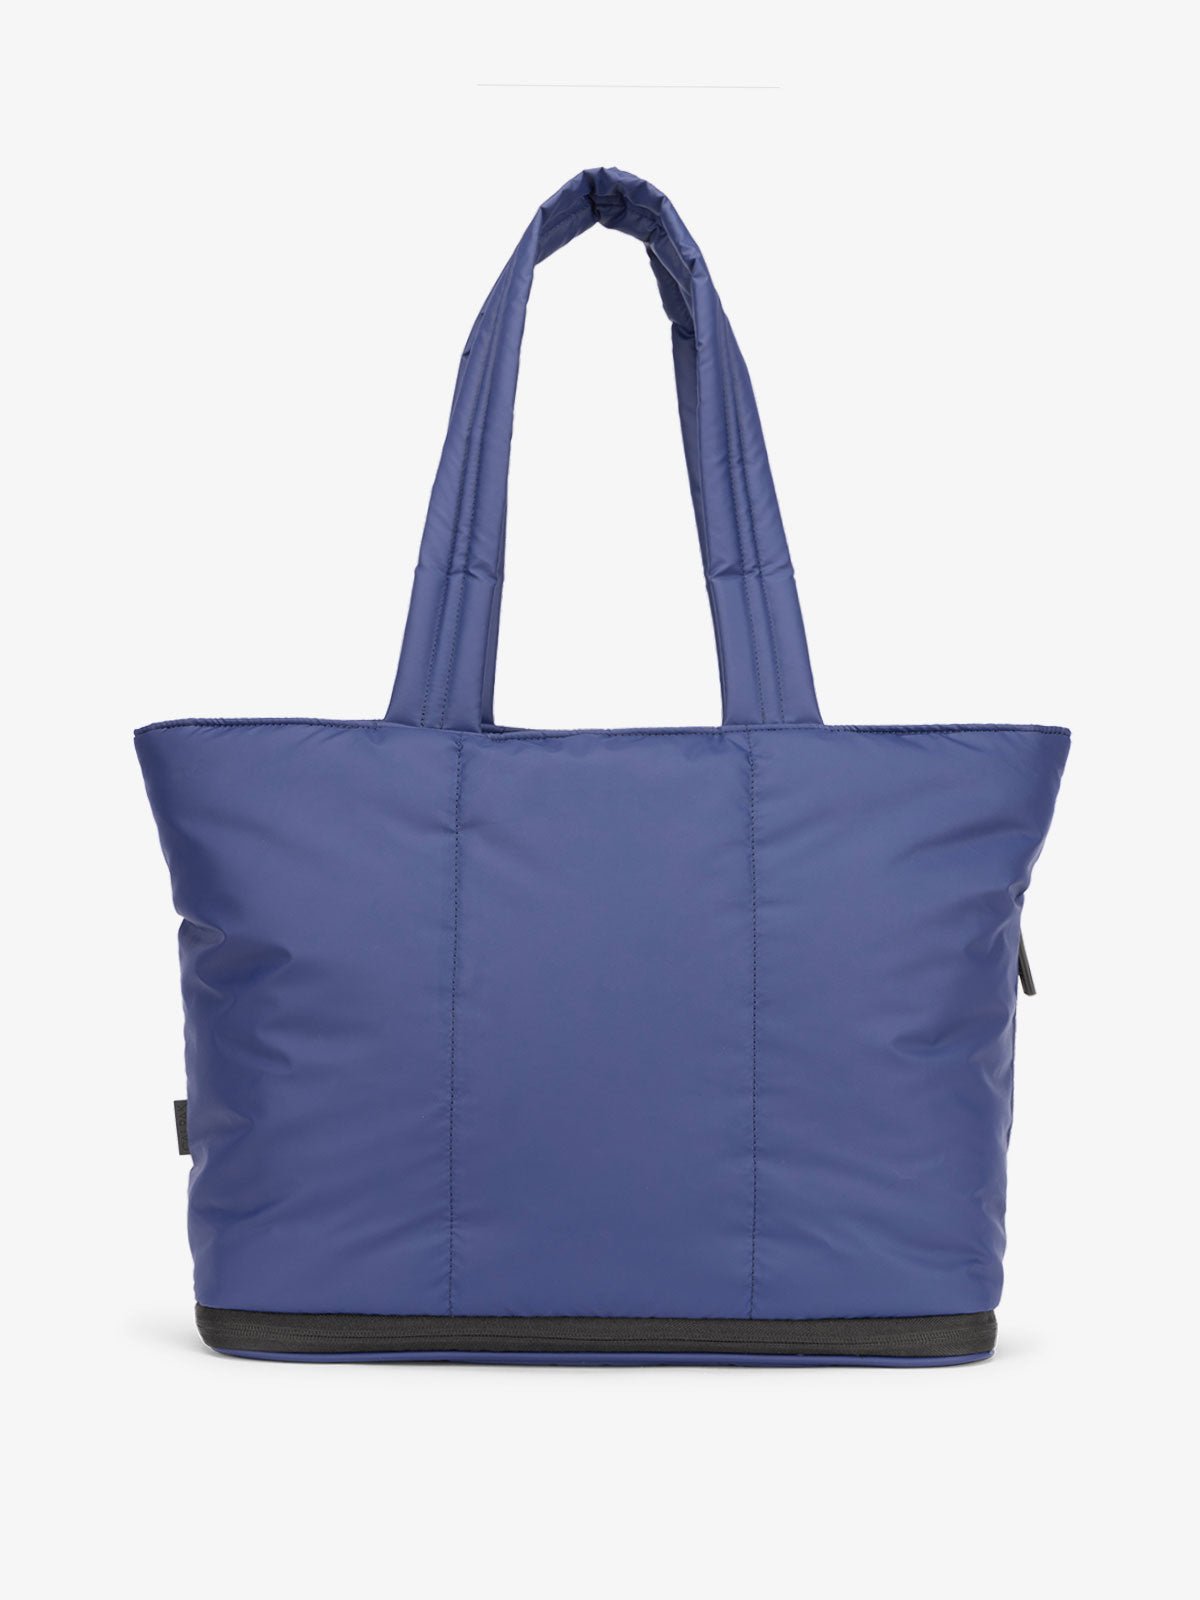 CALPAK Luka expandable tote bag with laptop compartment and padded straps in dark blue navy